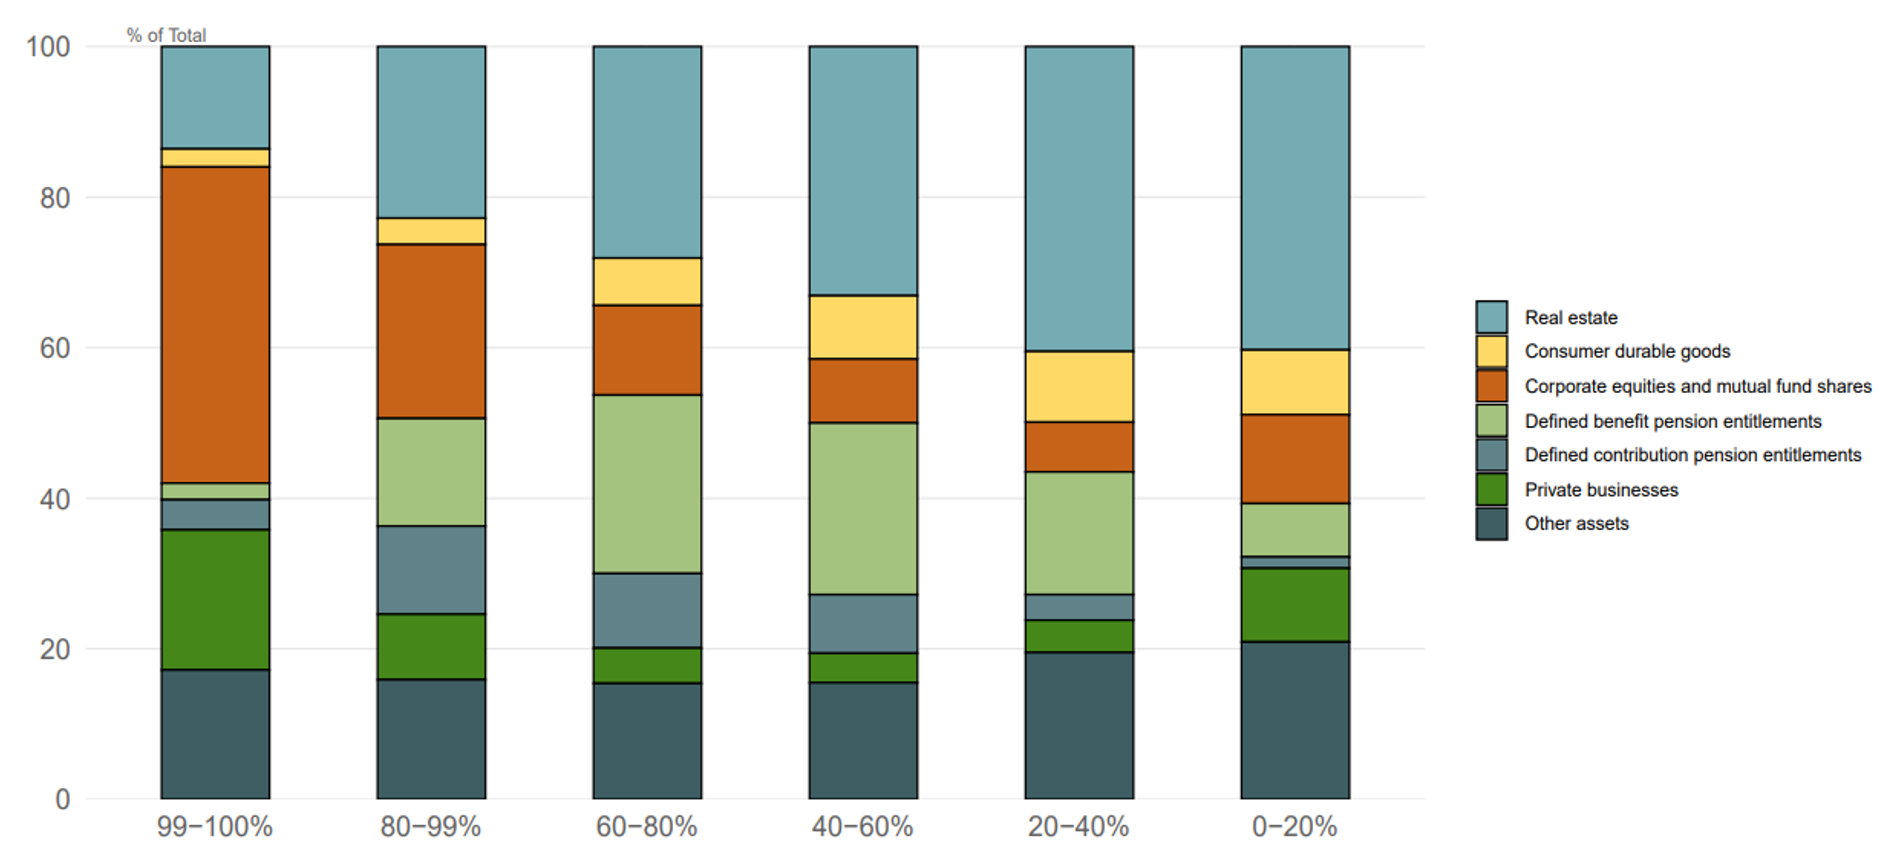 Figure 2. Assets by income percentile in 2019:Q4, percent of total. See accessible link for data.